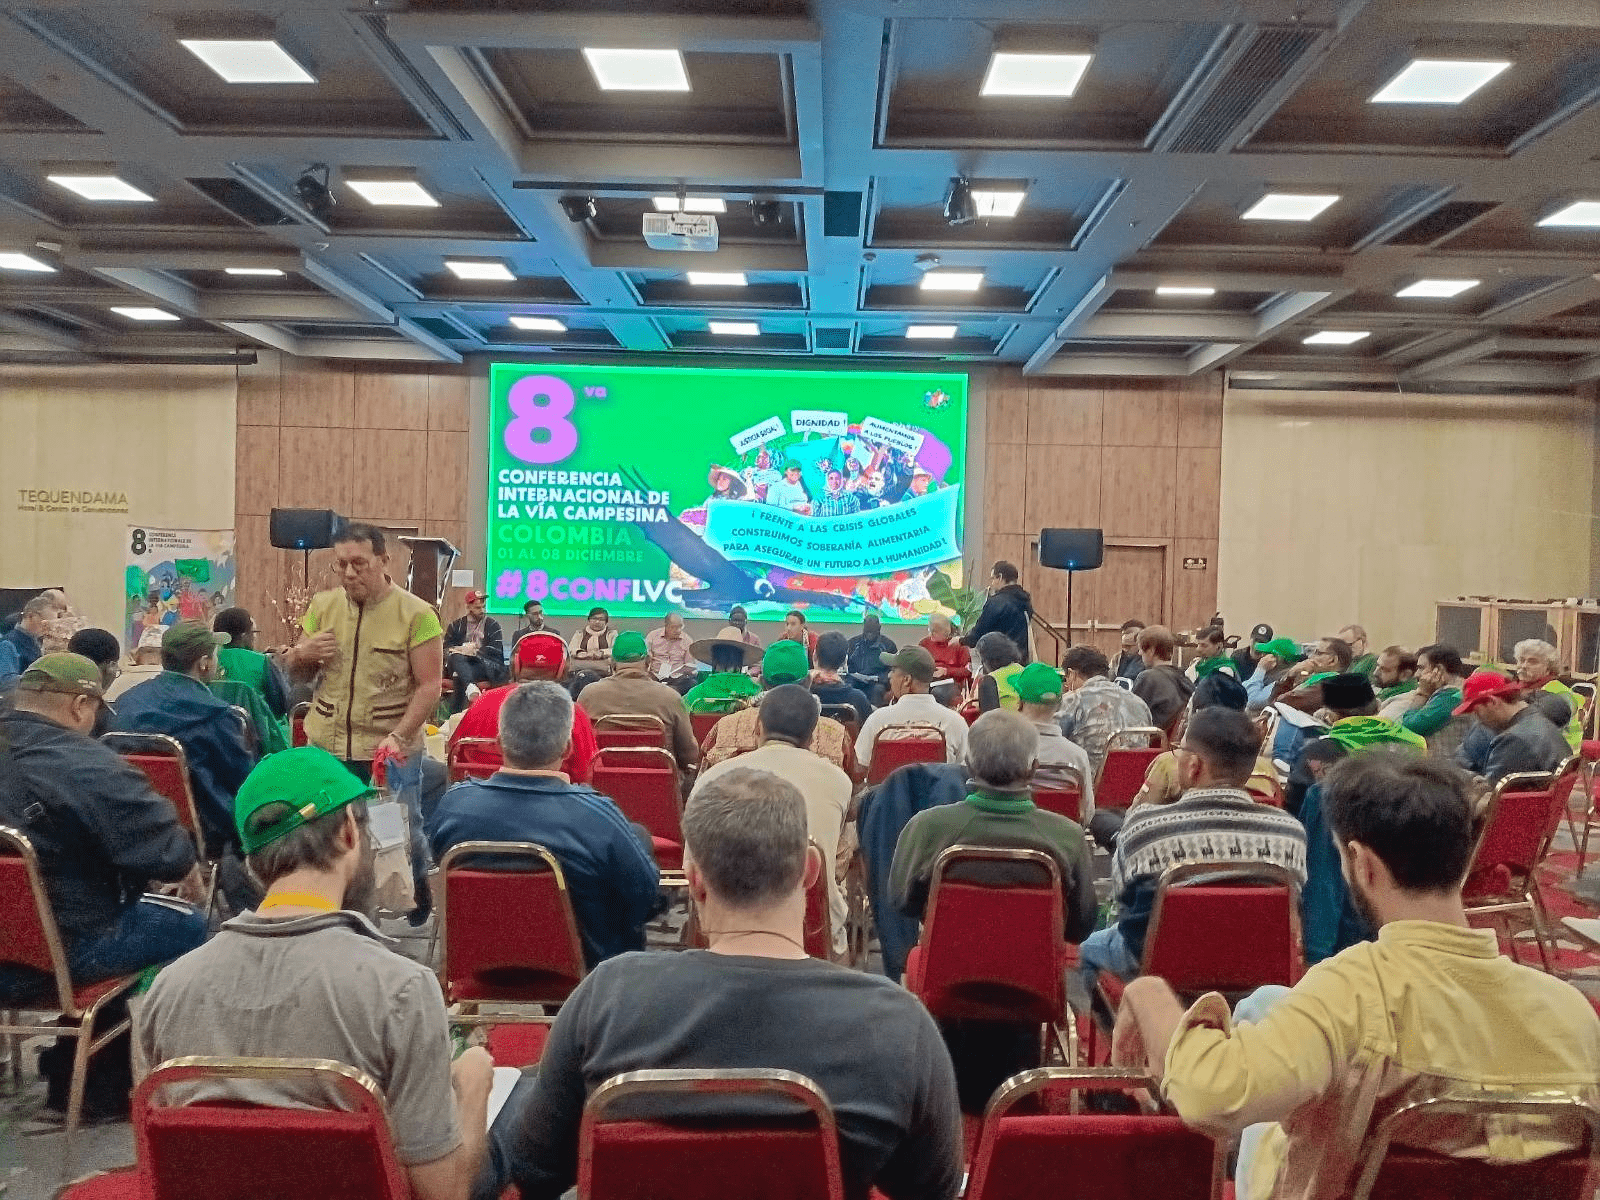 La Via Campesina reaffirms its commitment to fight against patriarchy